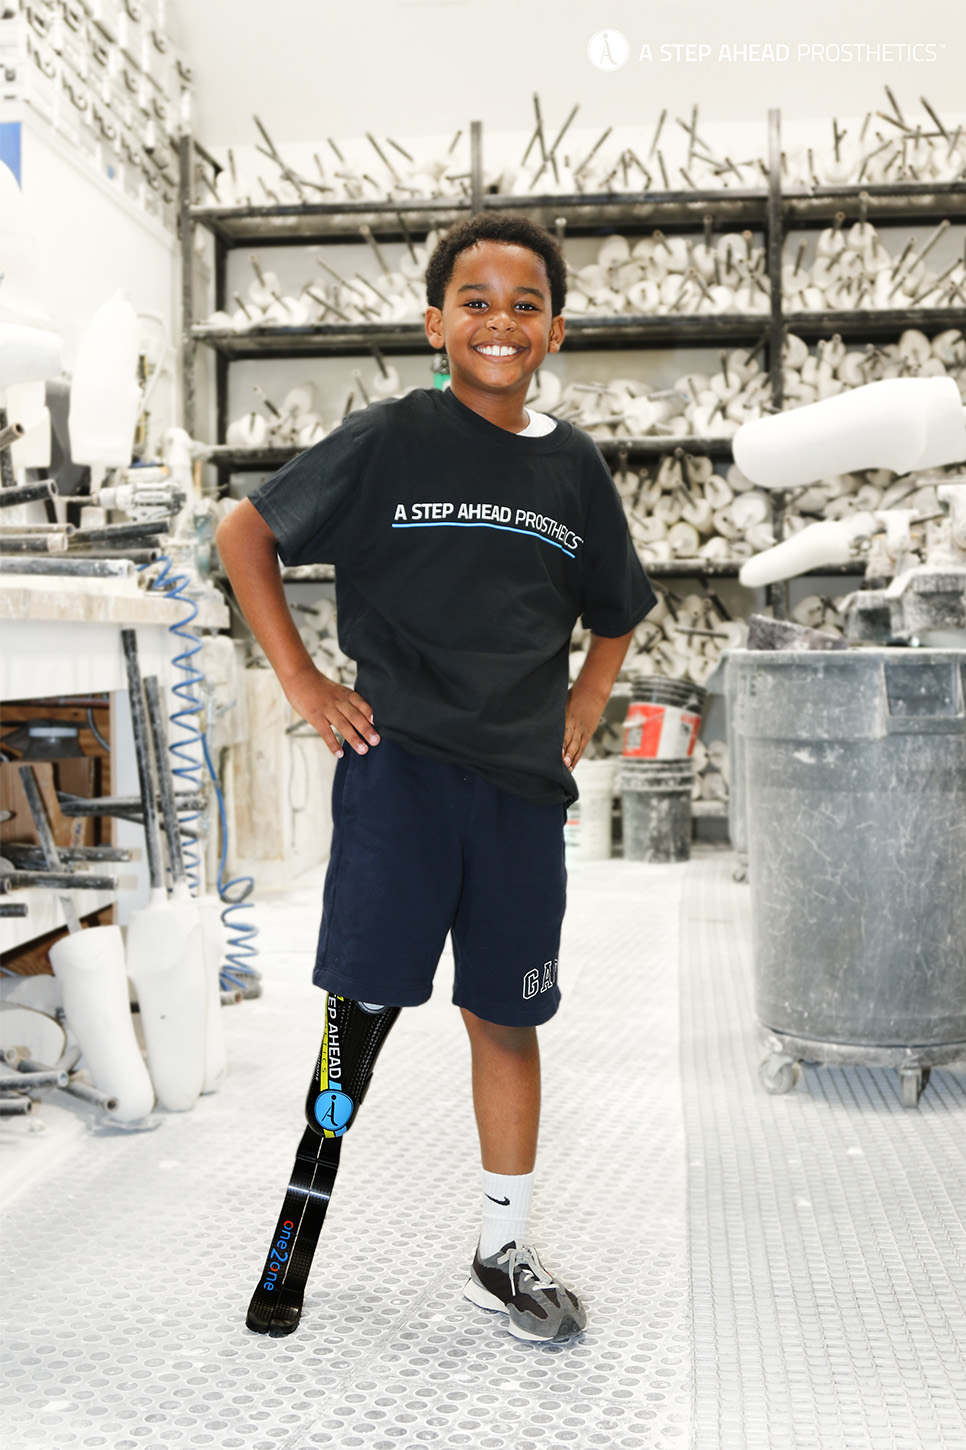 A young male with a prosthetic leg stands confidently